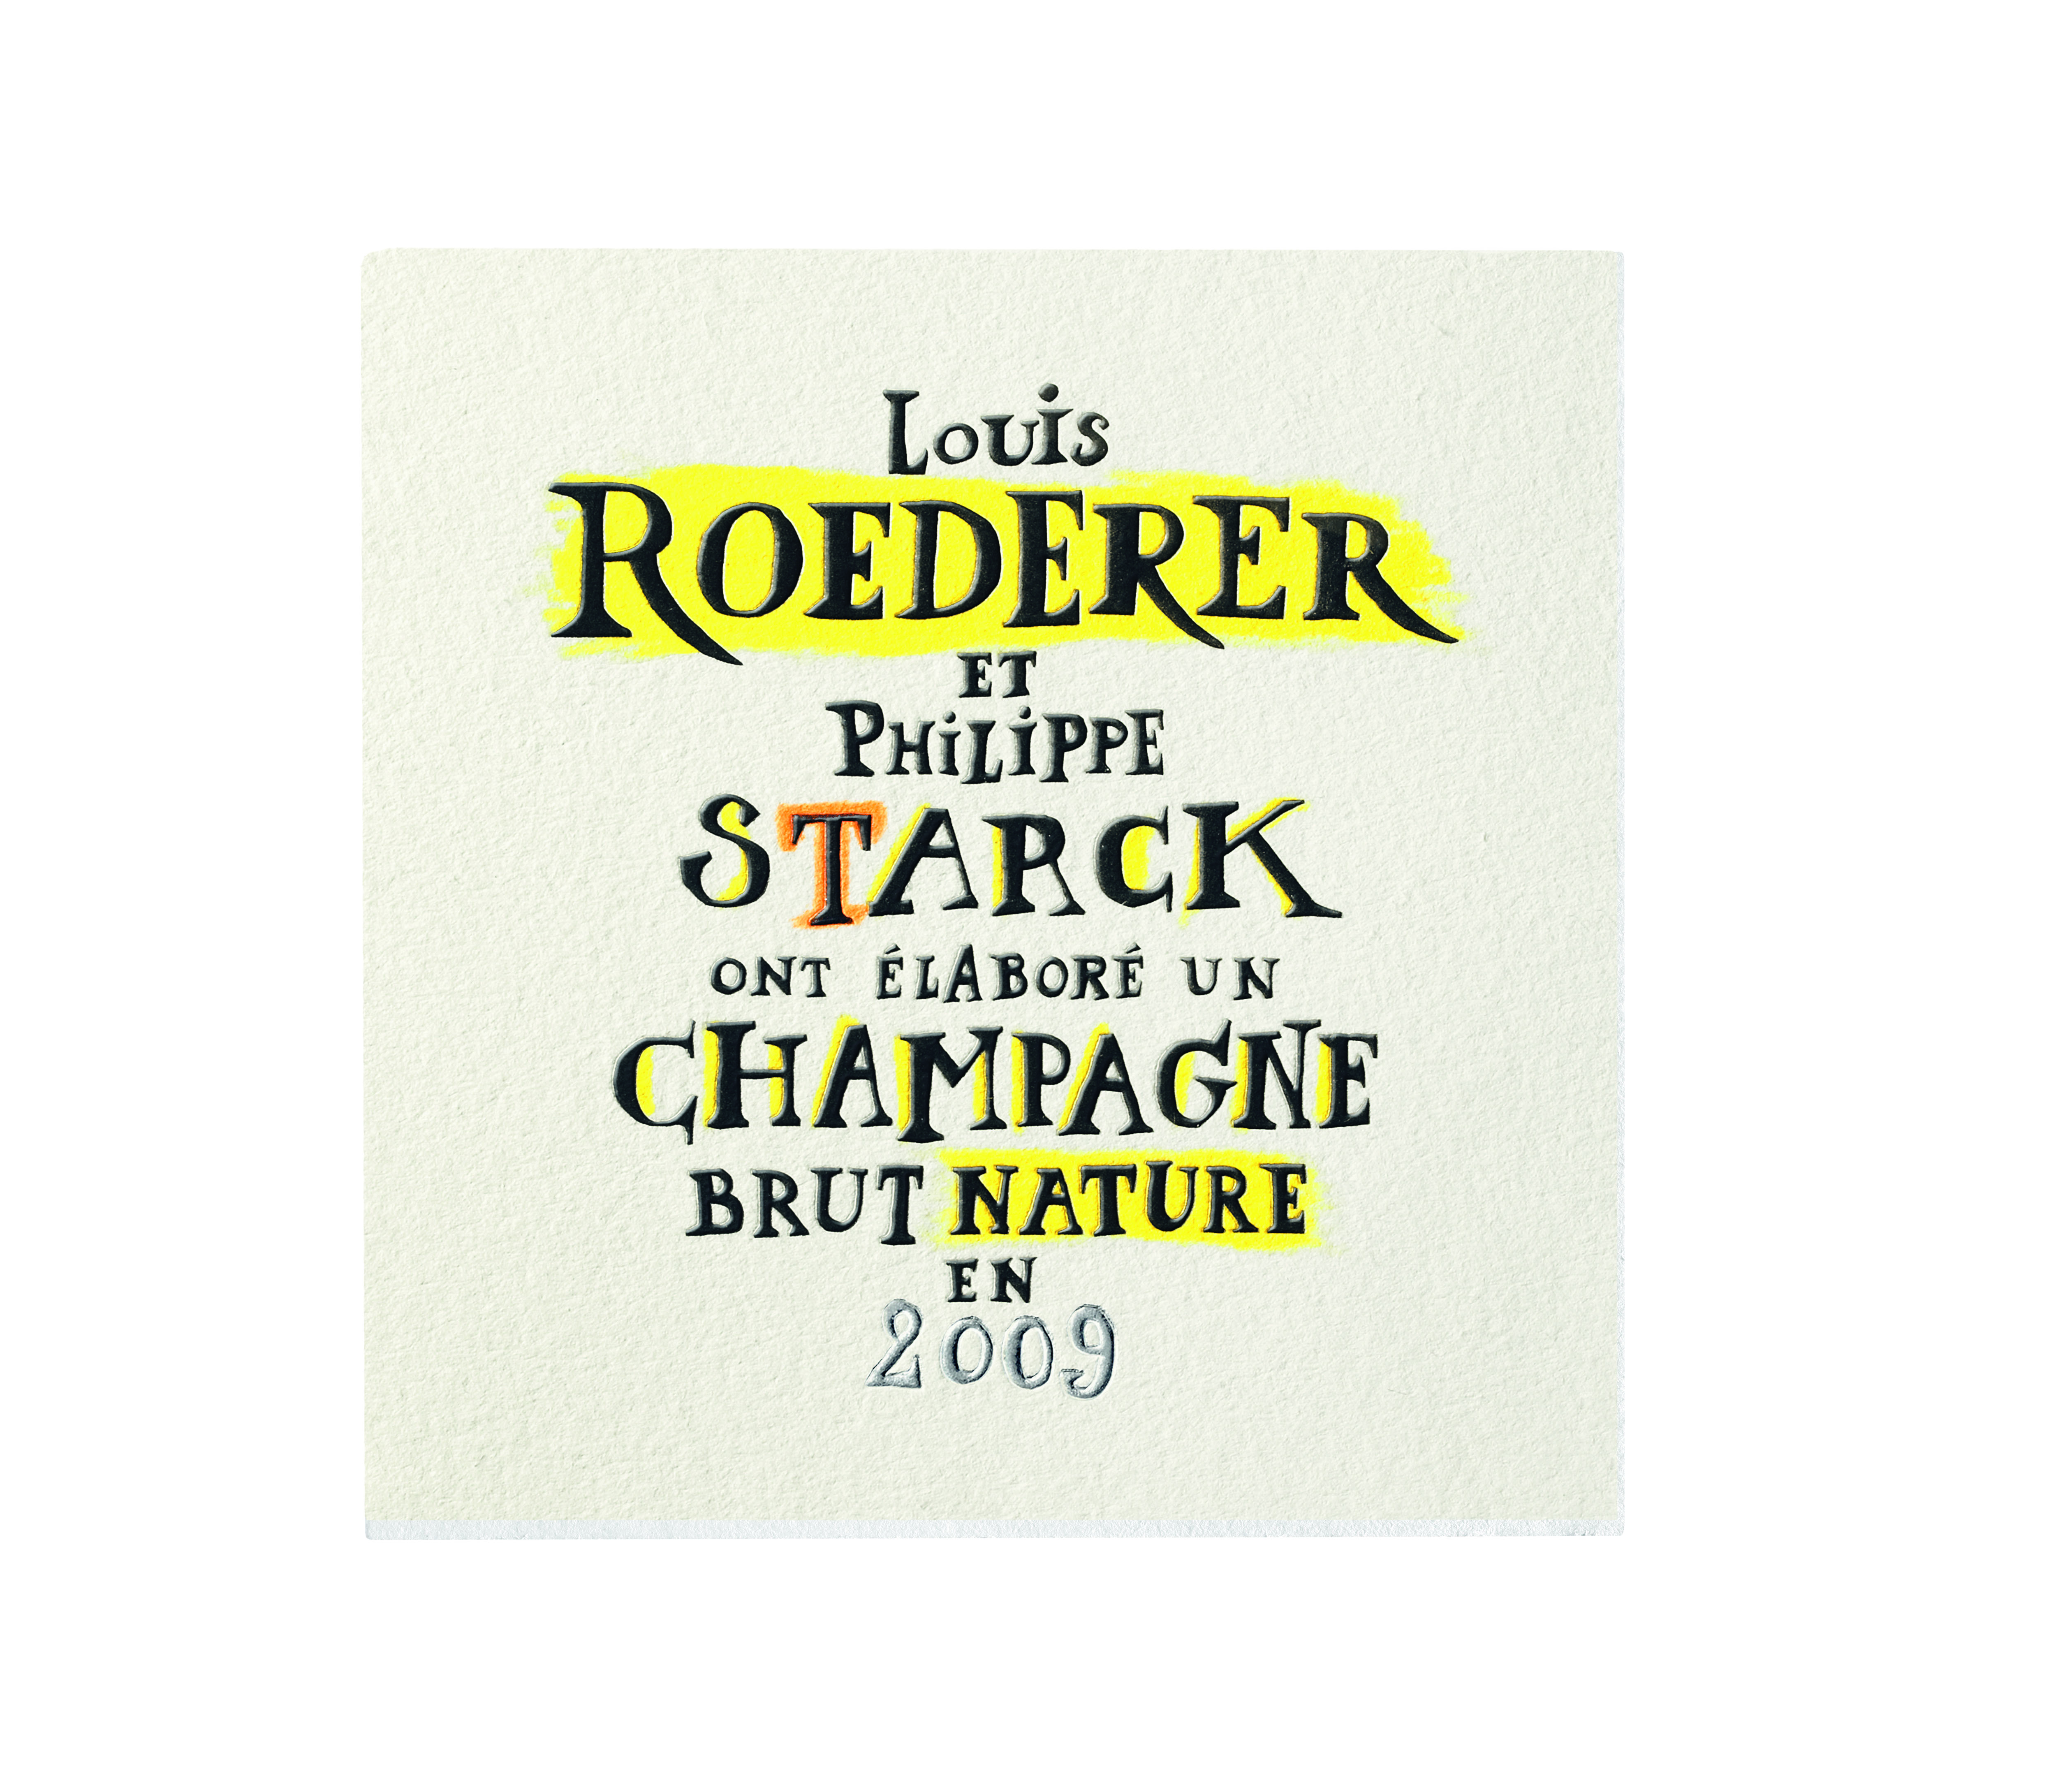 Louis Roederer Brut Nature 2009 by Philippe Starck